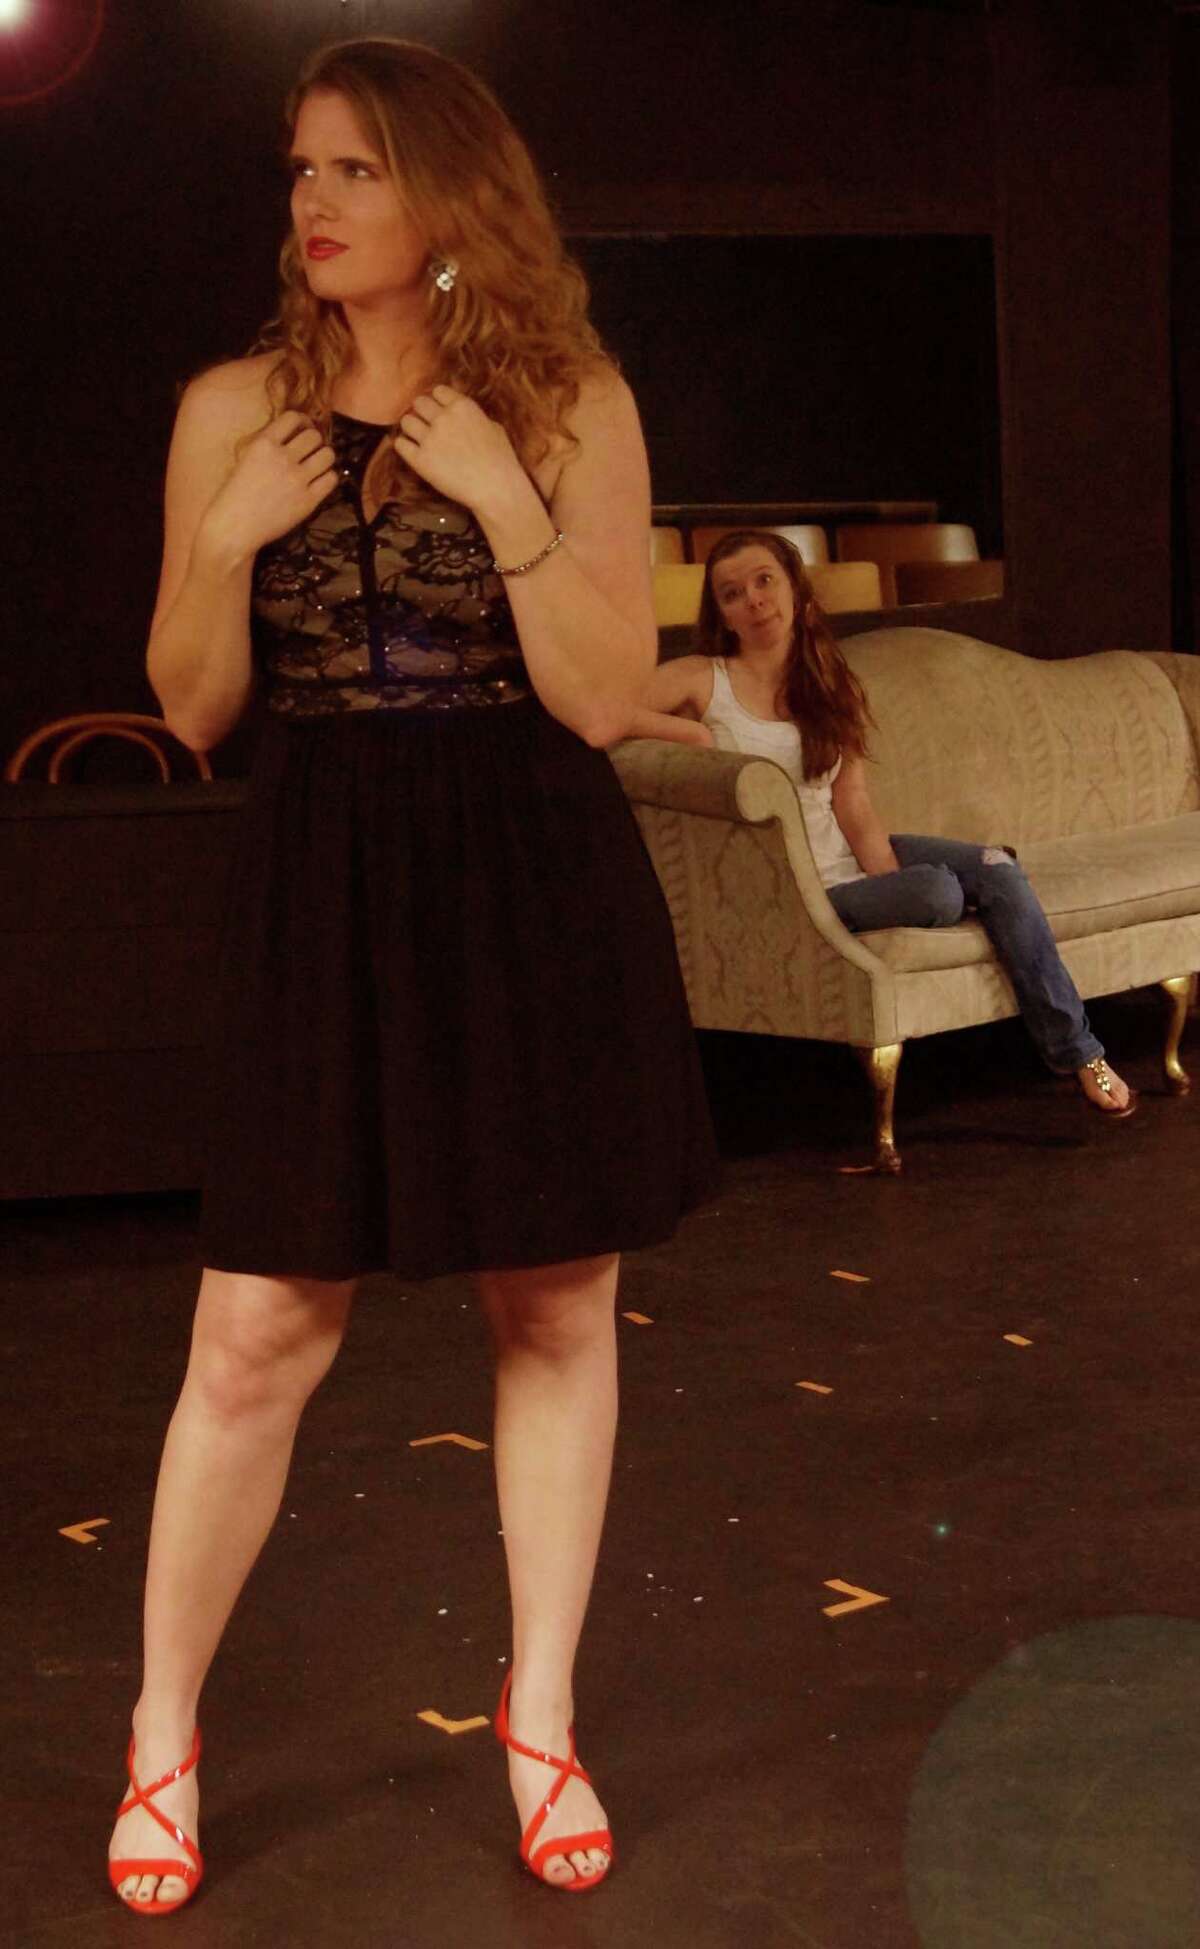 Rachel Comish and Abby Storch star in "Center of the Universe" at the Overtime Theater.